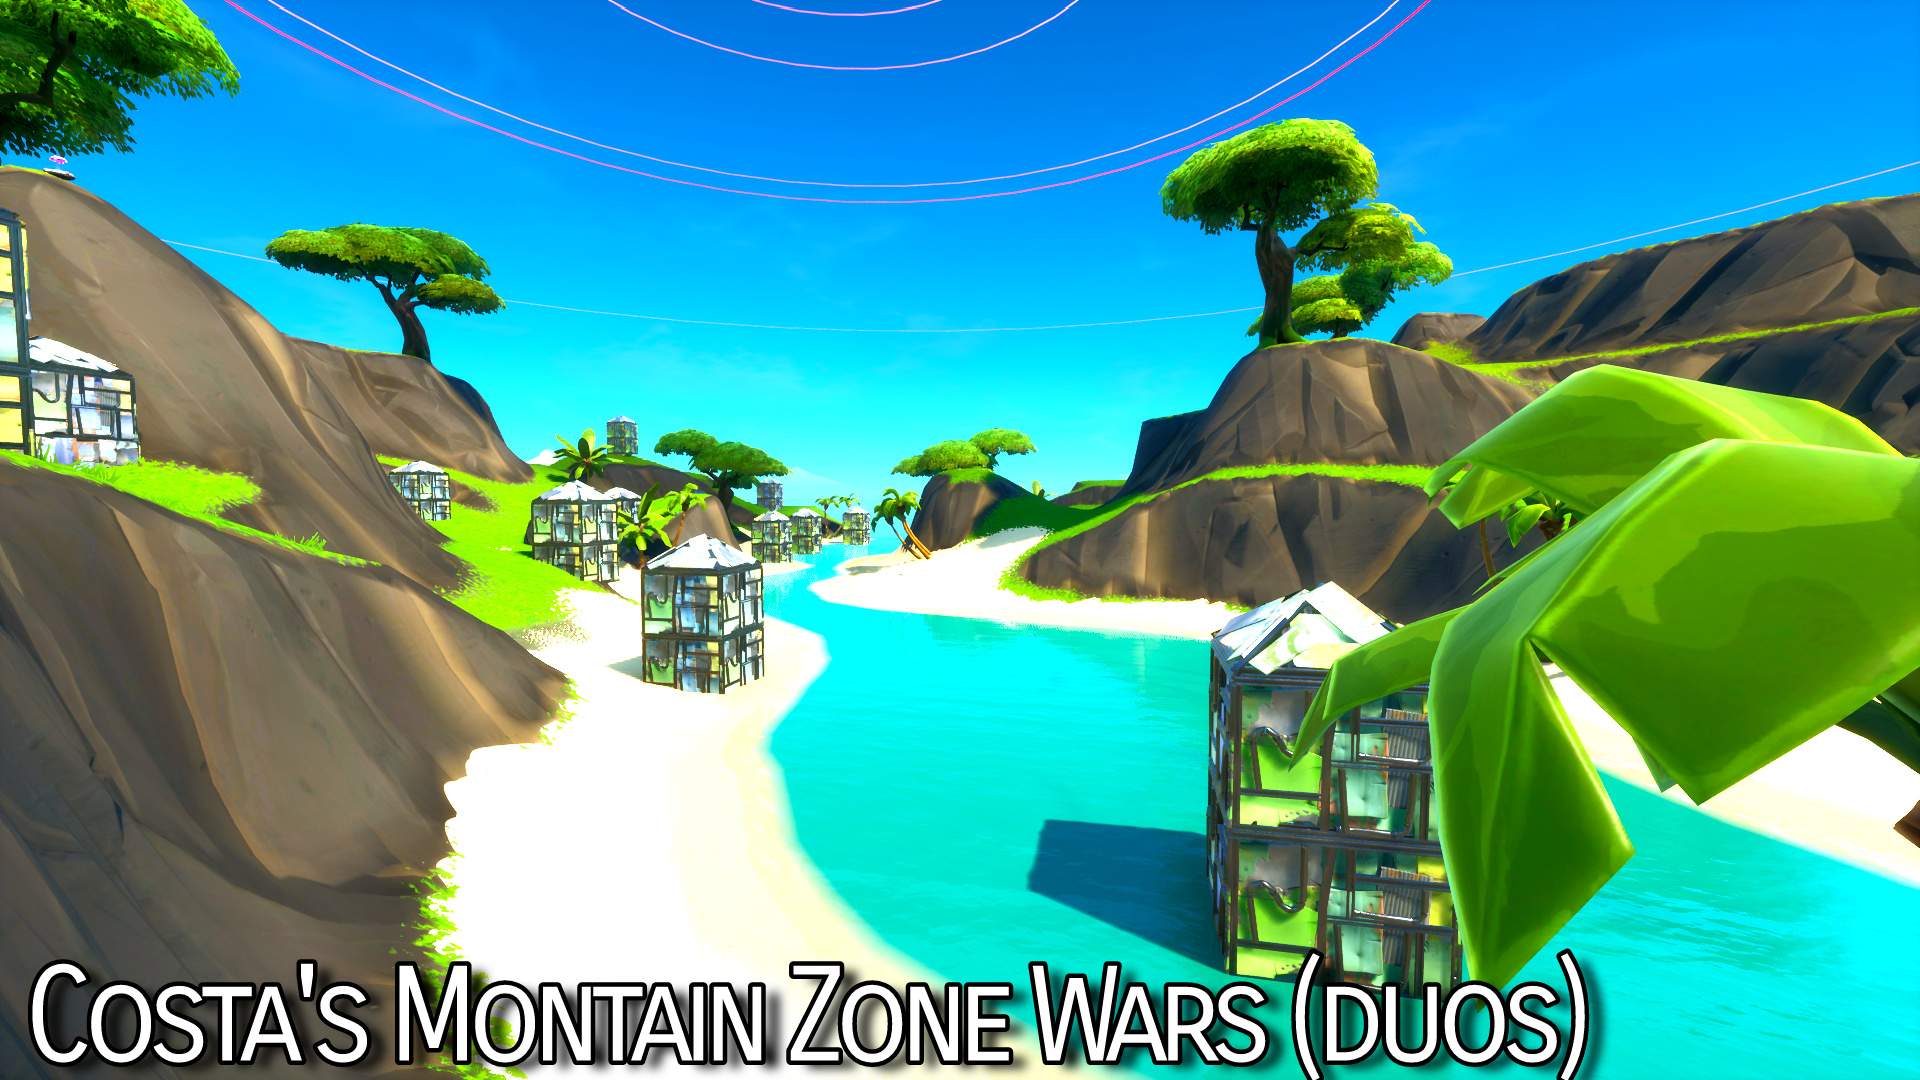 COSTA'S MONTAIN ZONE WARS (DUOS)